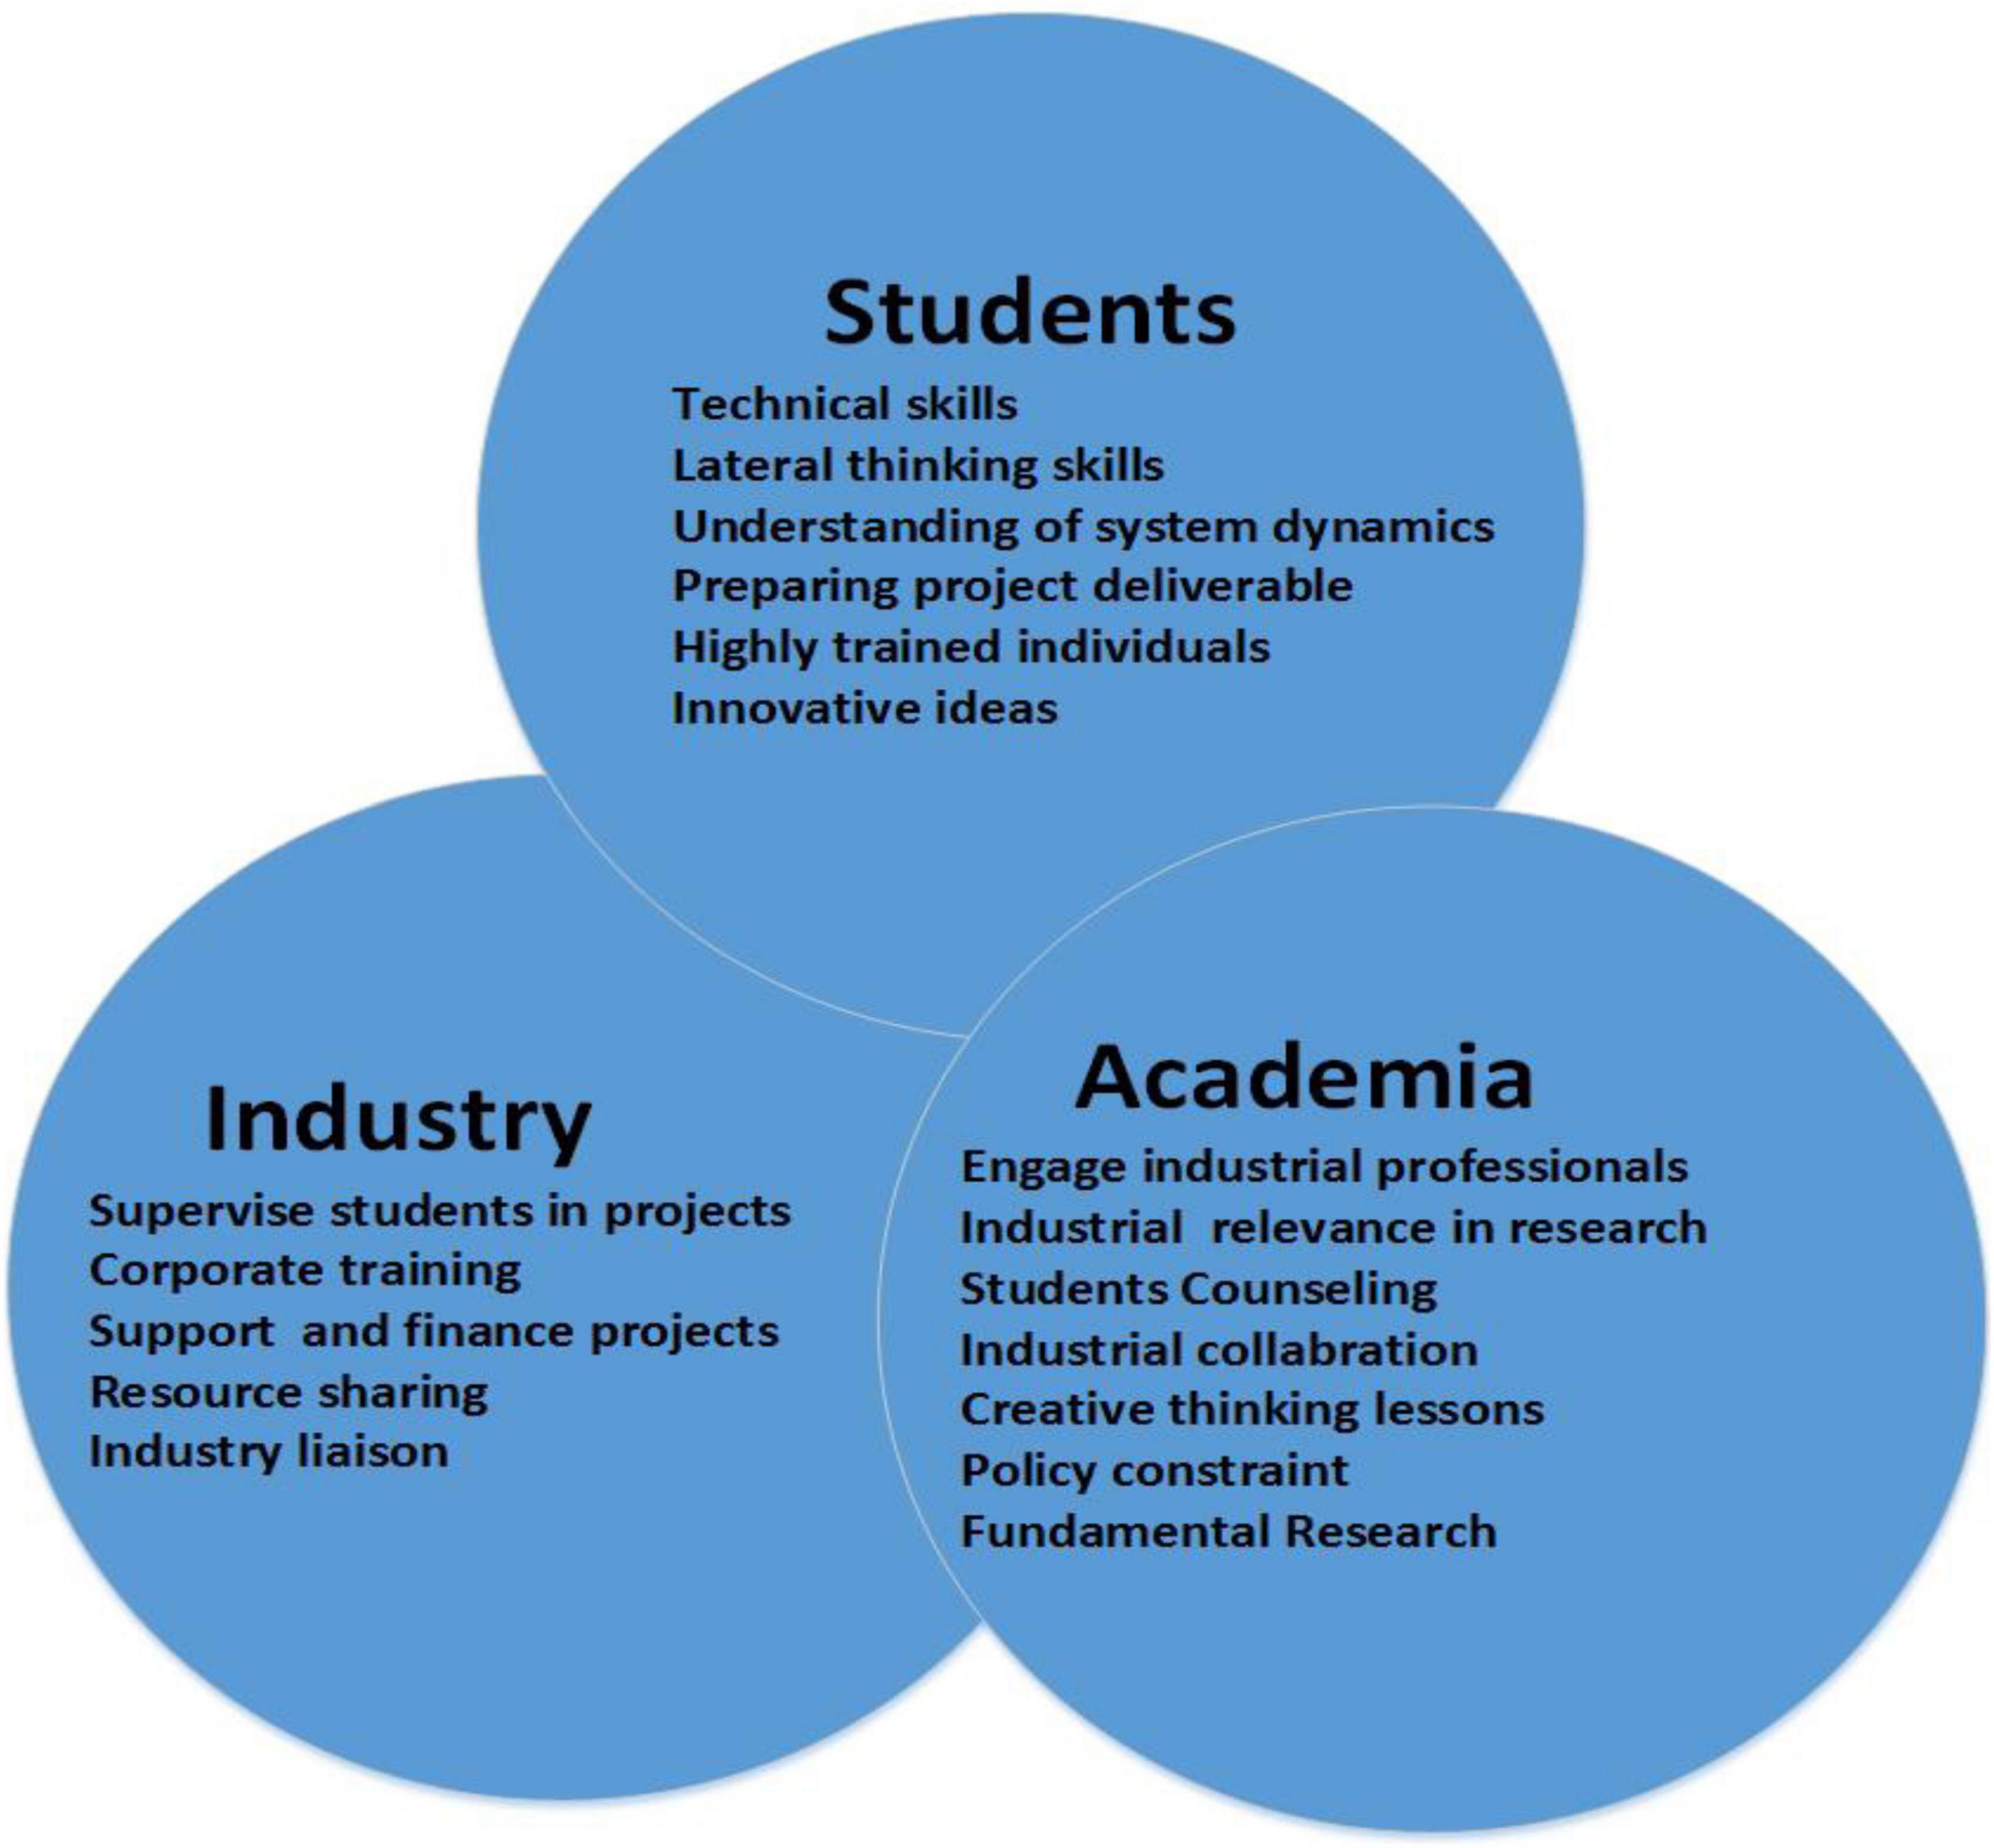 educational institutions business model